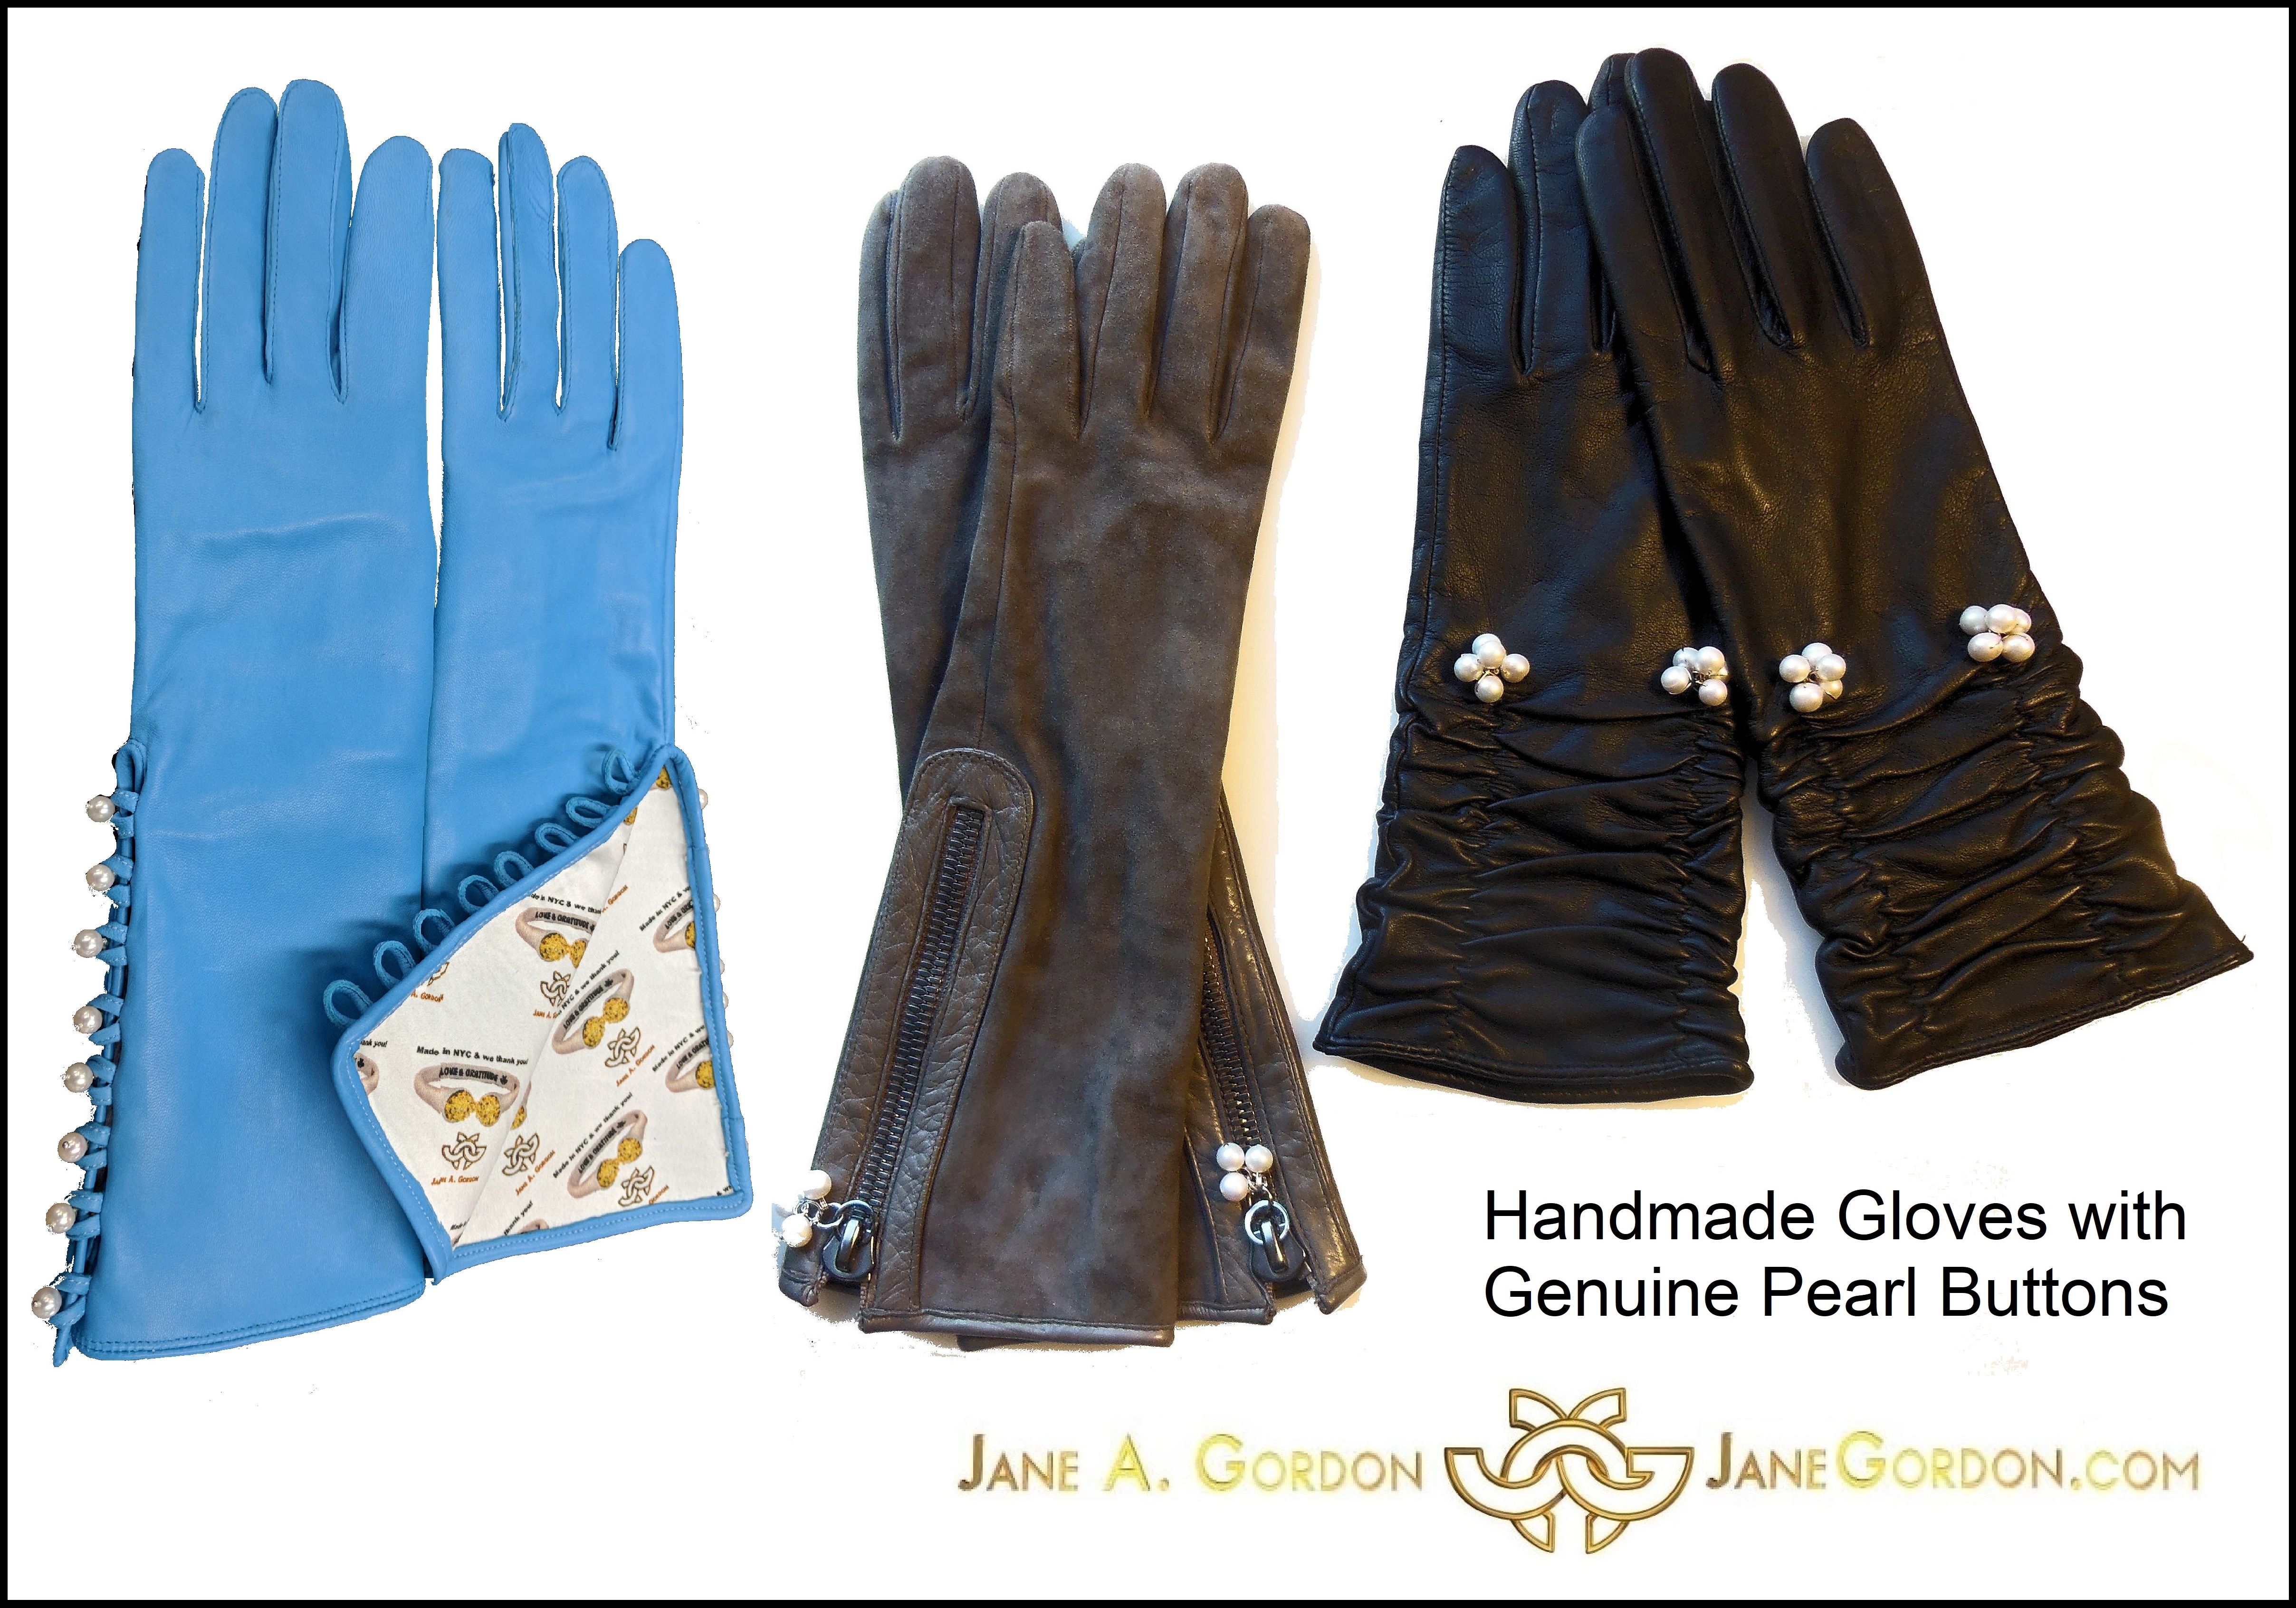 Handmade Leather Gloves with Genuine Pearl Buttons: Jane Gordon Jewelry